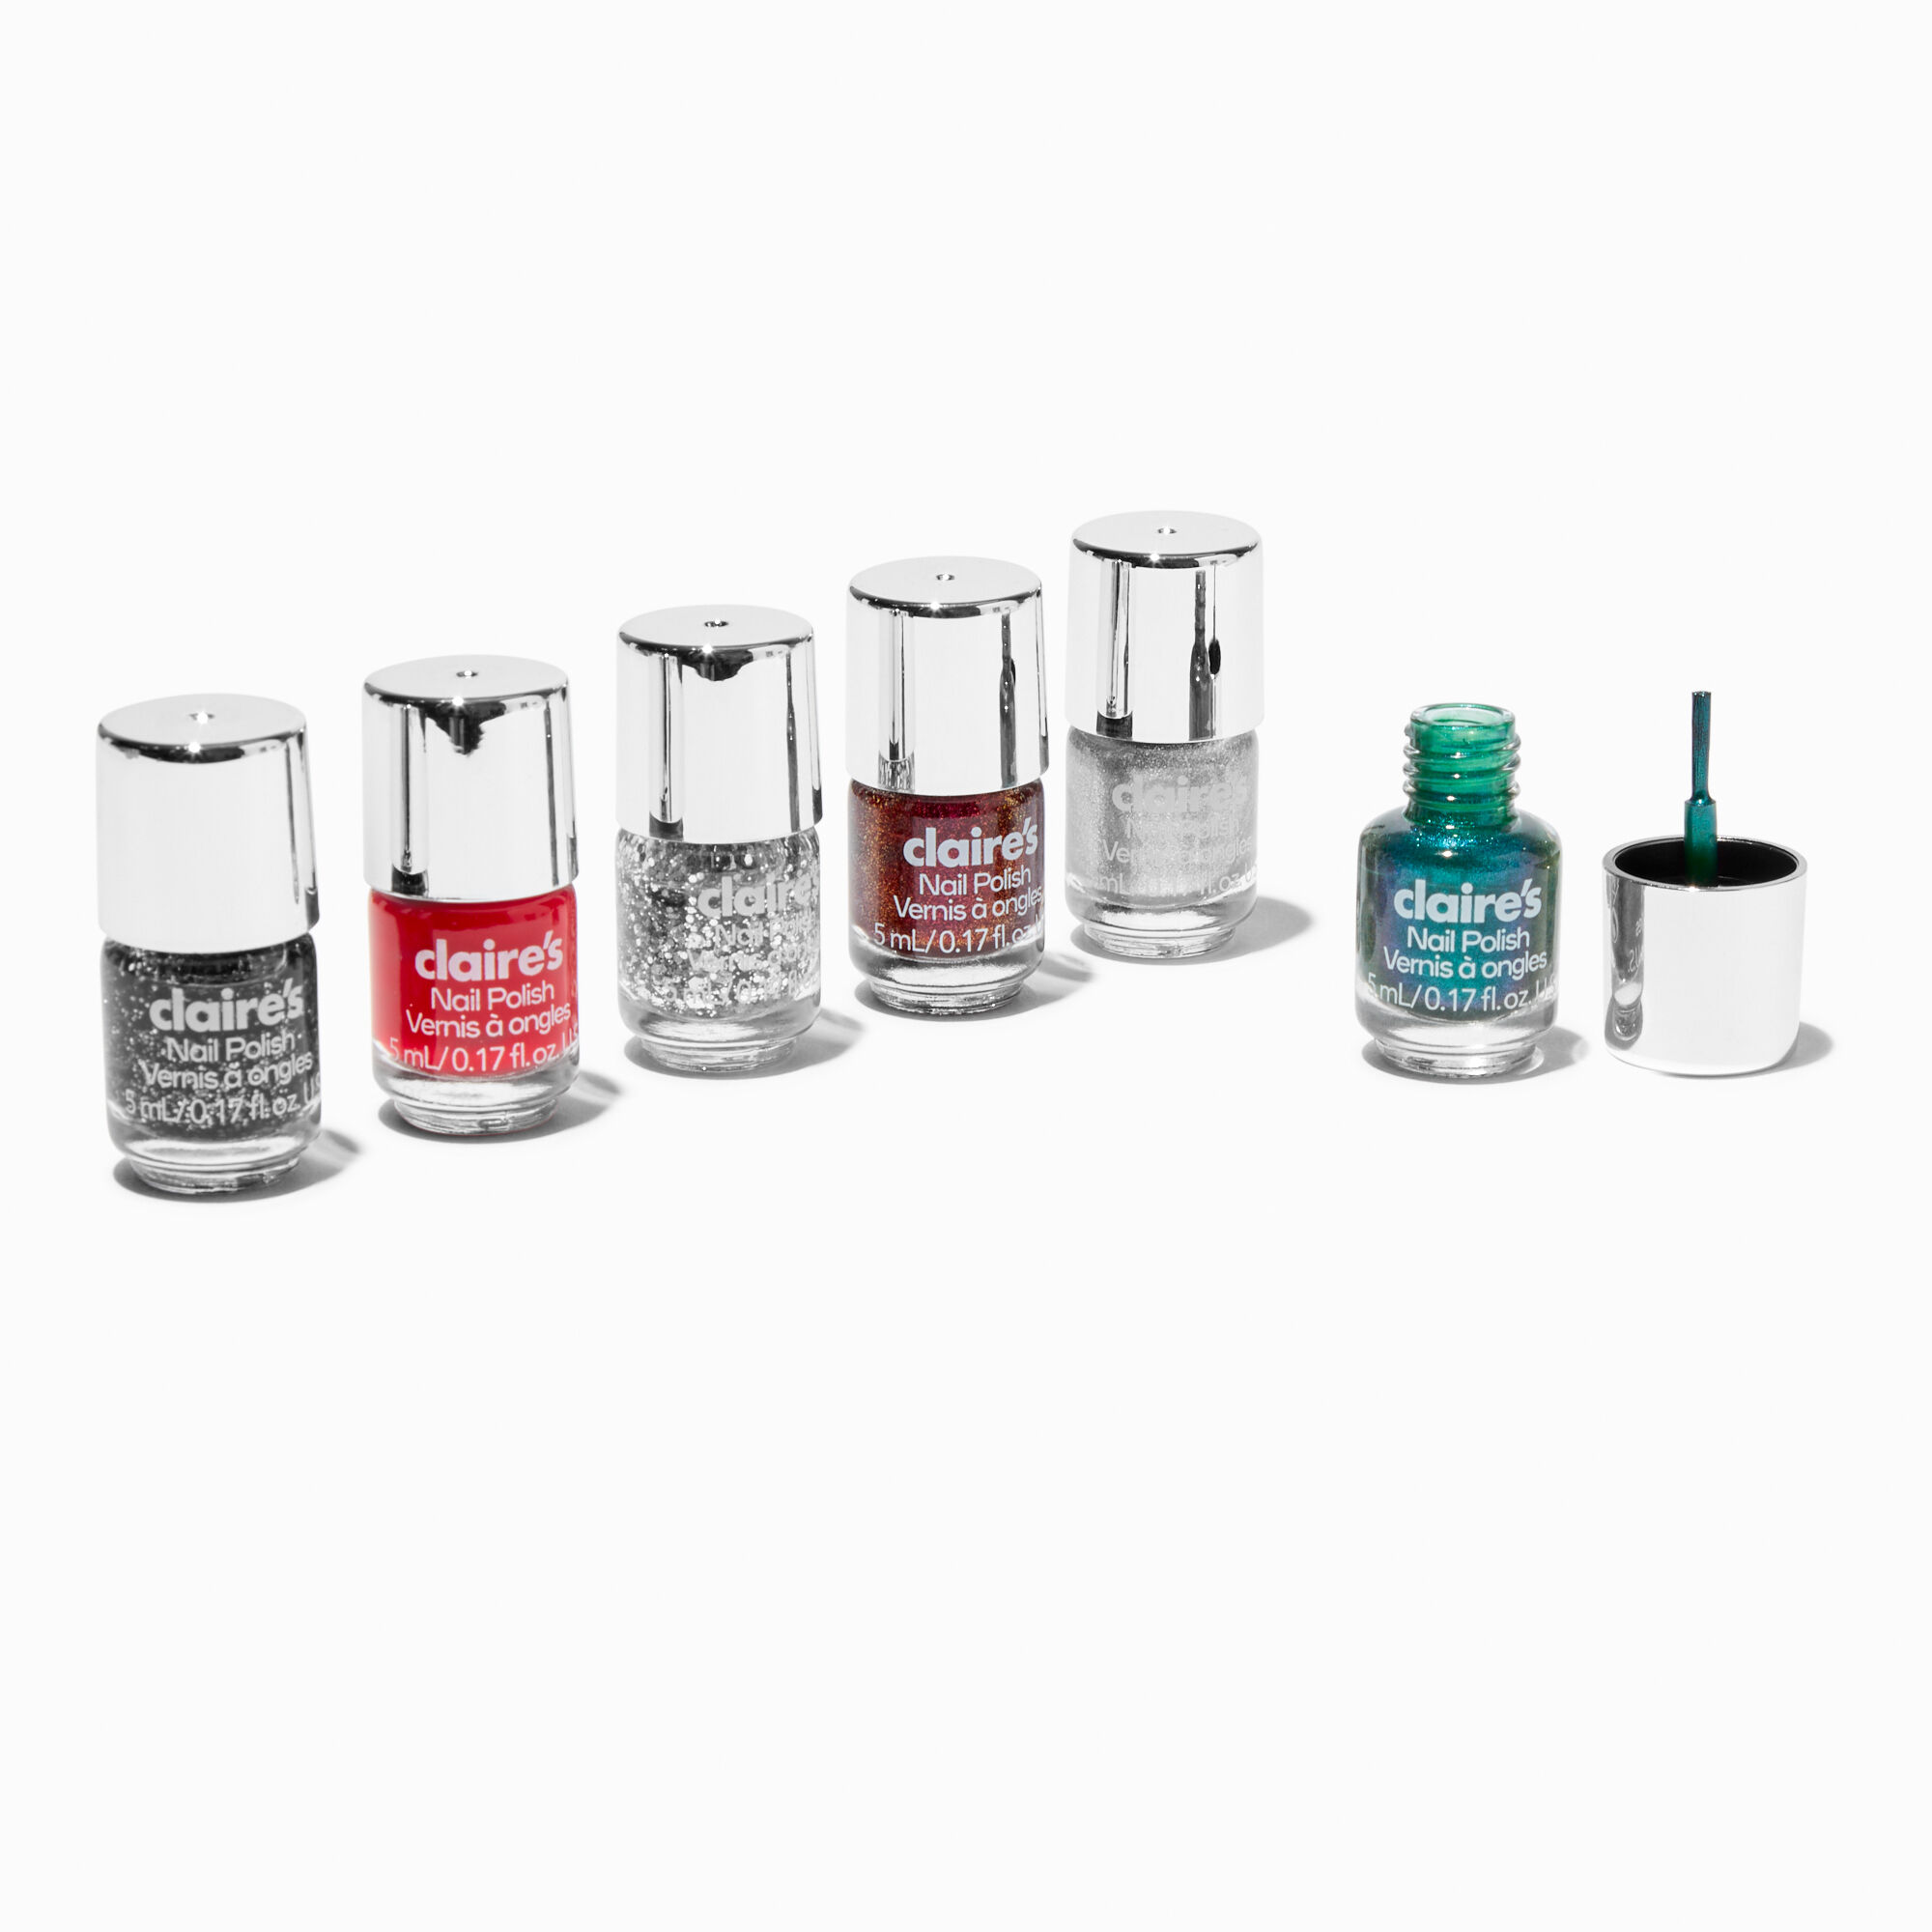 View Claires Holiday Mini Nail Polish 6 Pack Rainbow information